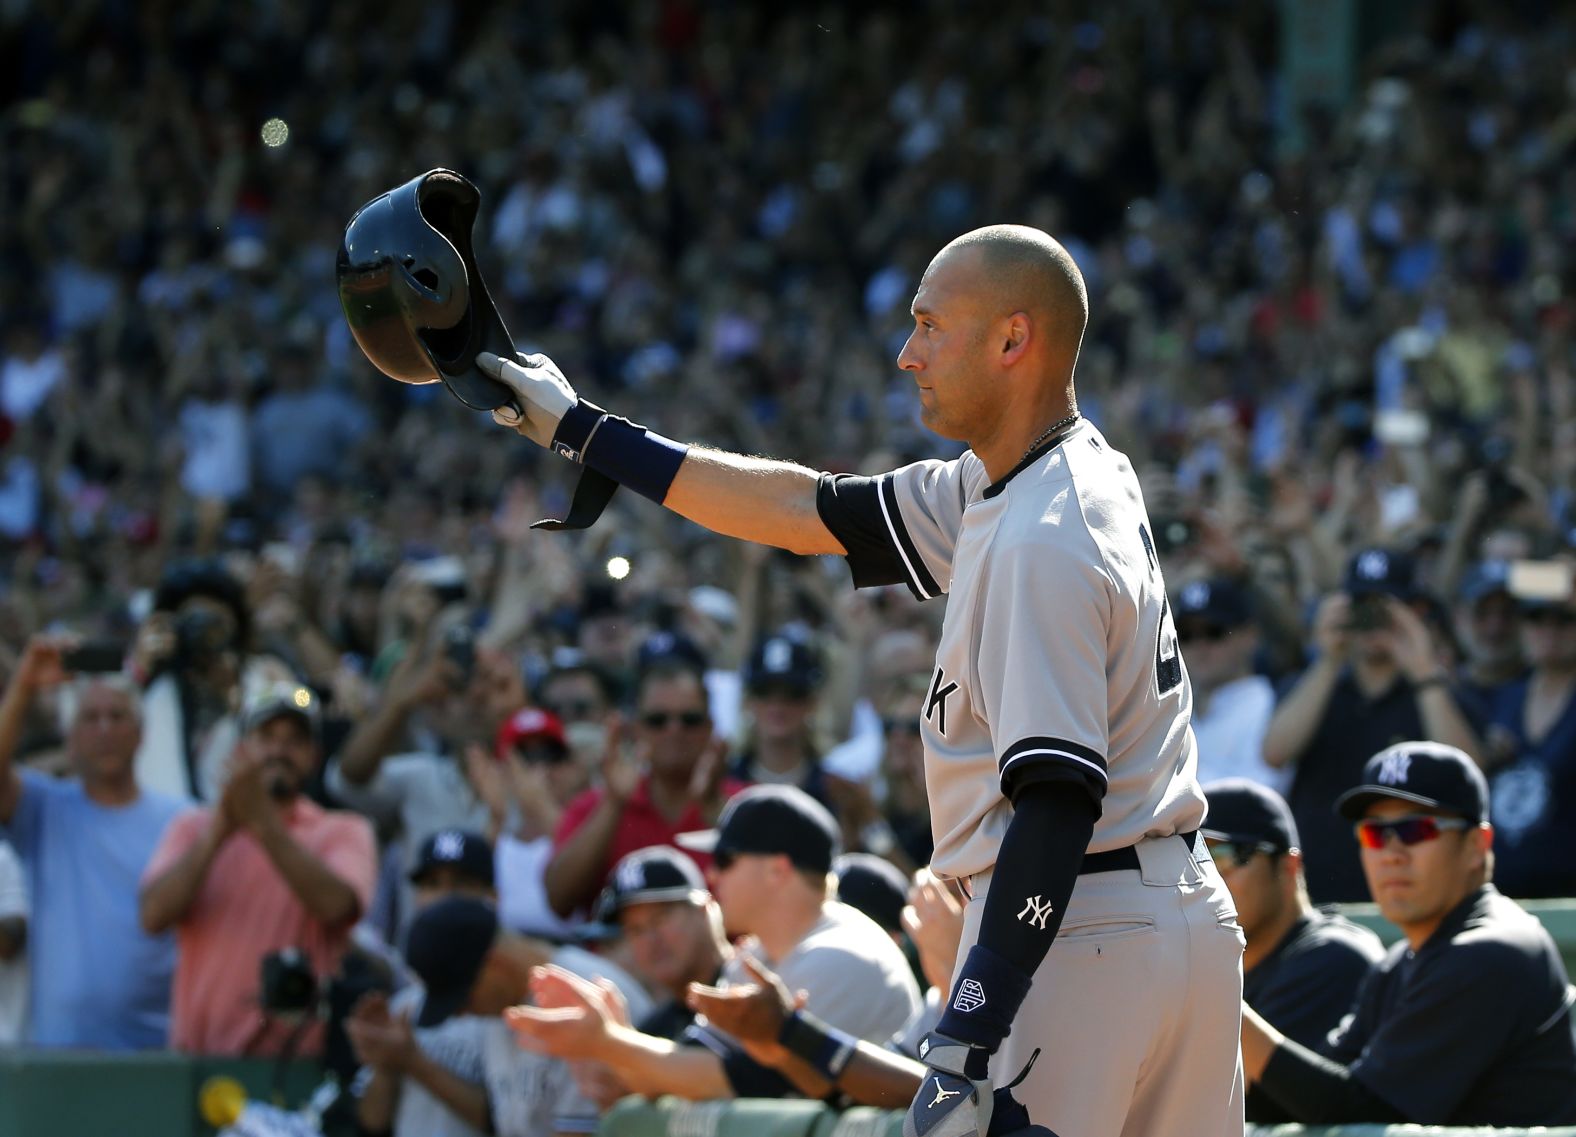 Jeter tips his cap to the crowd at Fenway Park after coming out of his last game in September 2014.